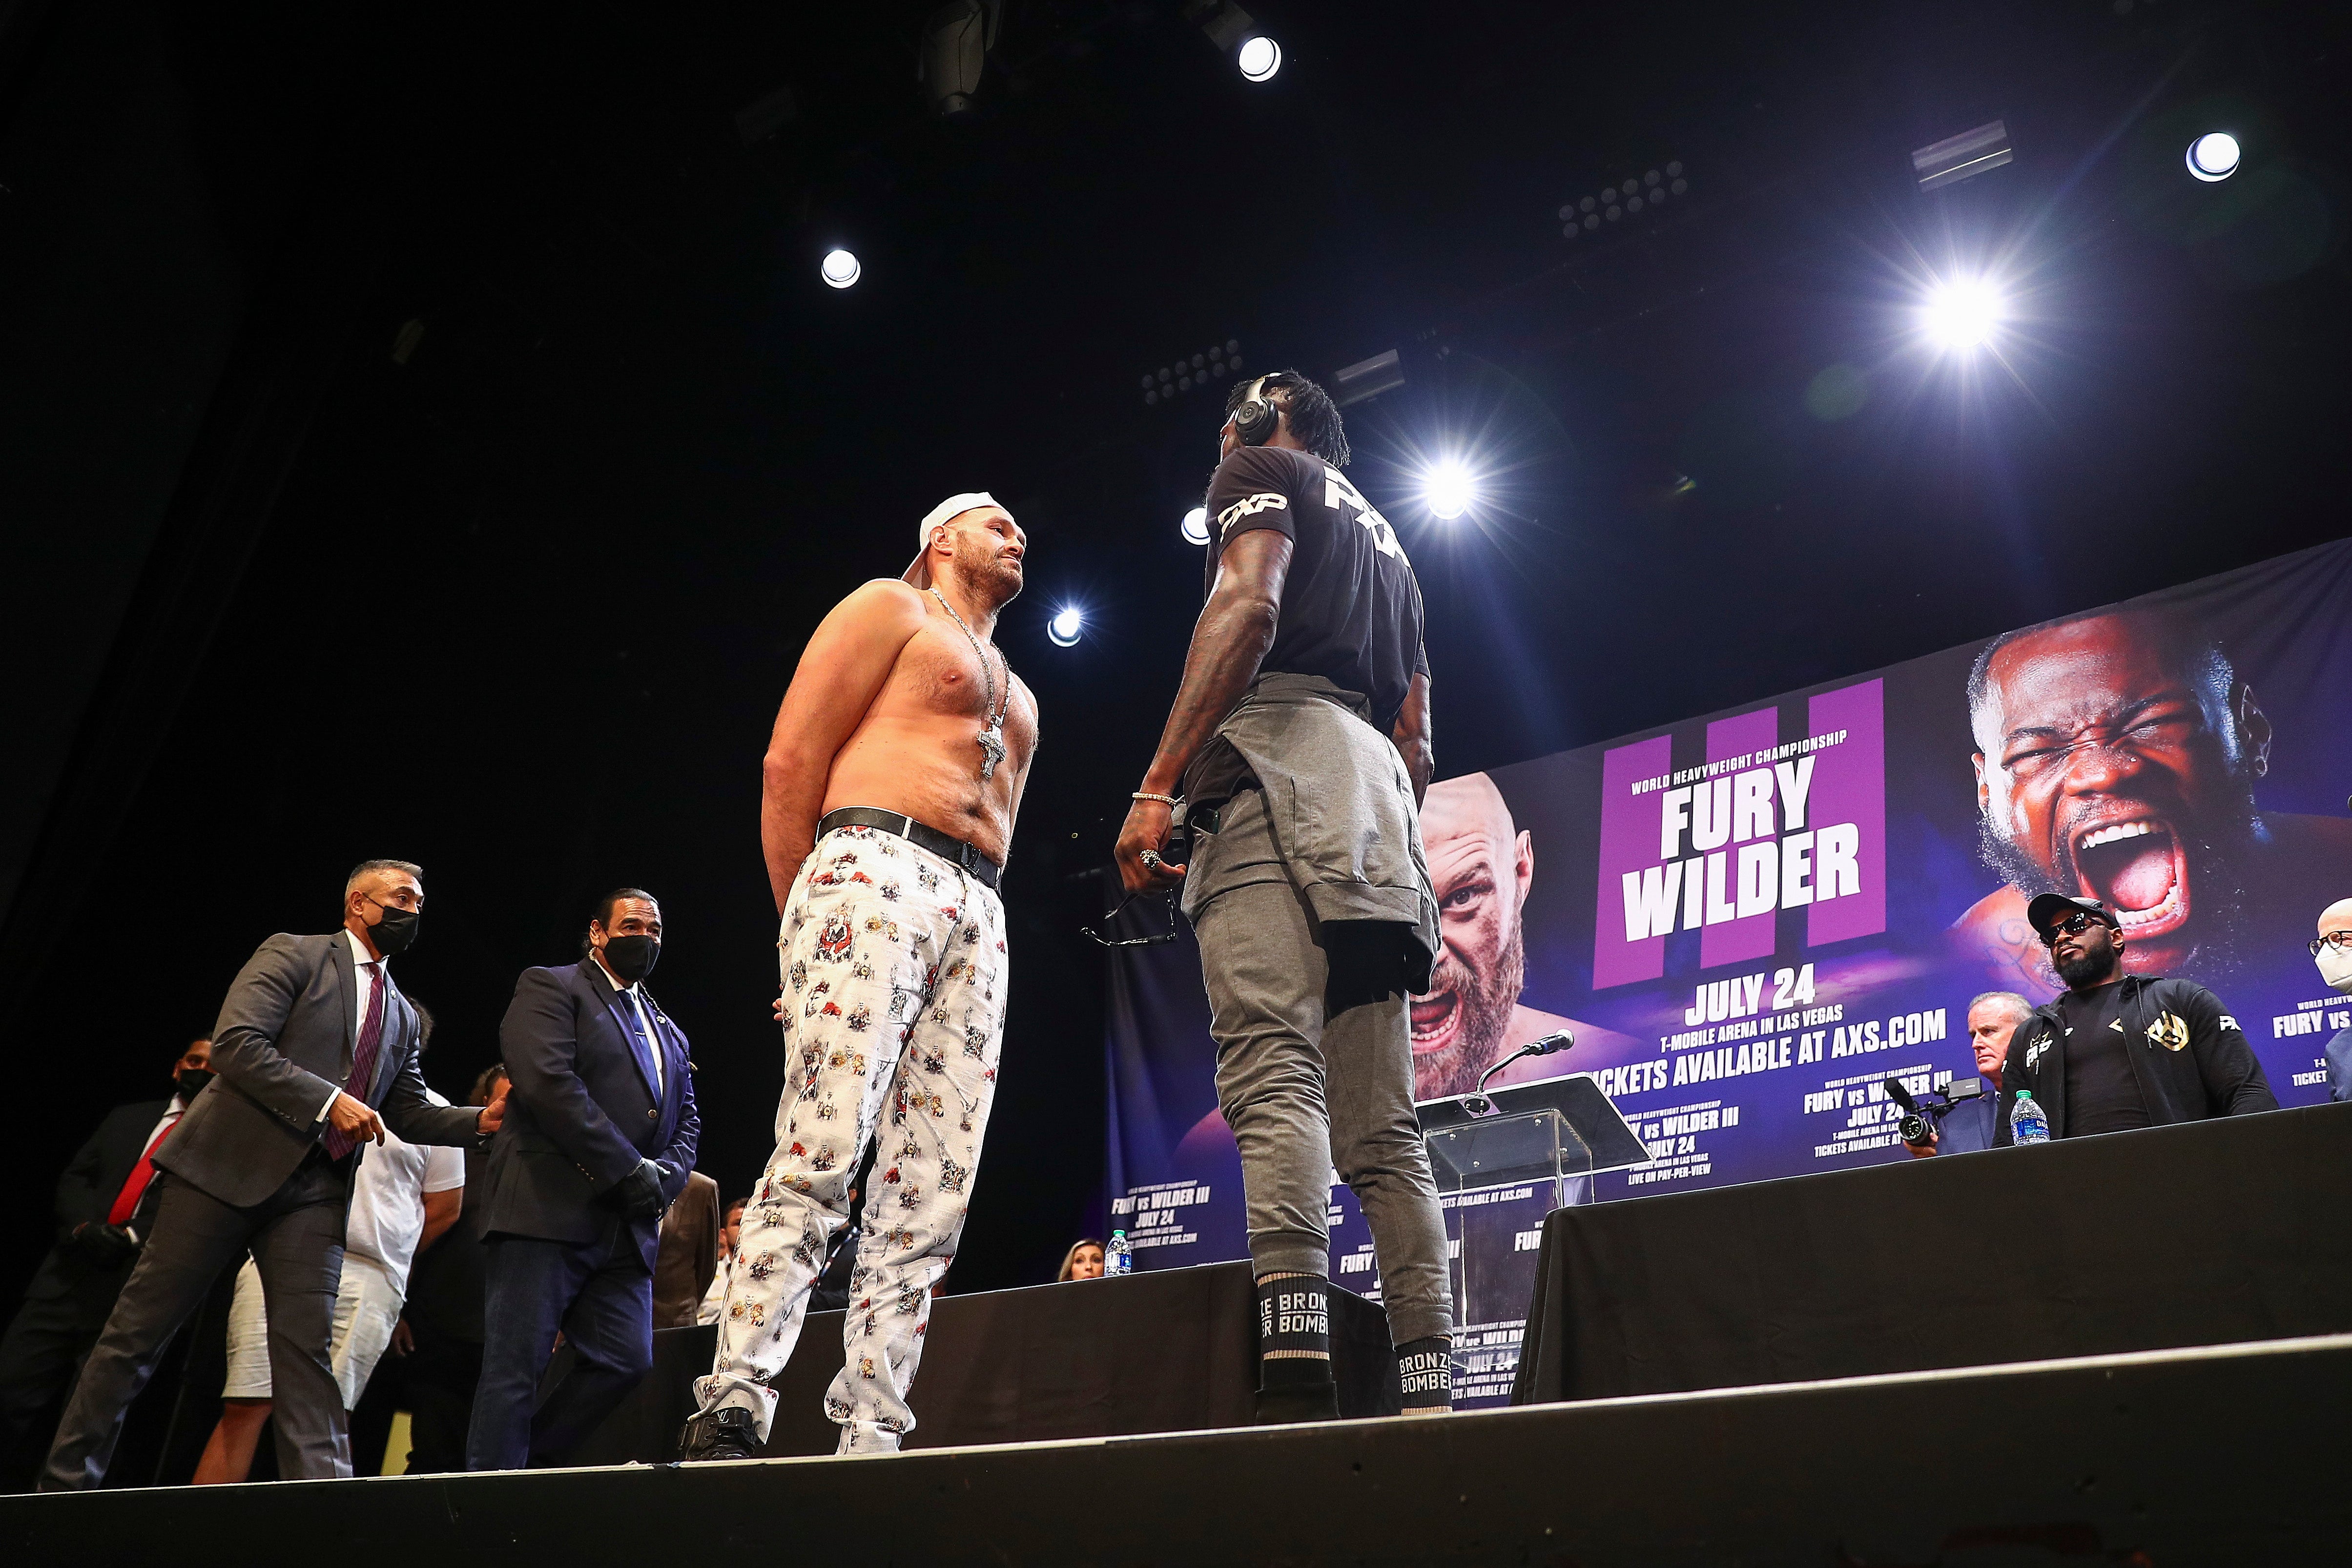 The fighters won’t face off at their weigh-in